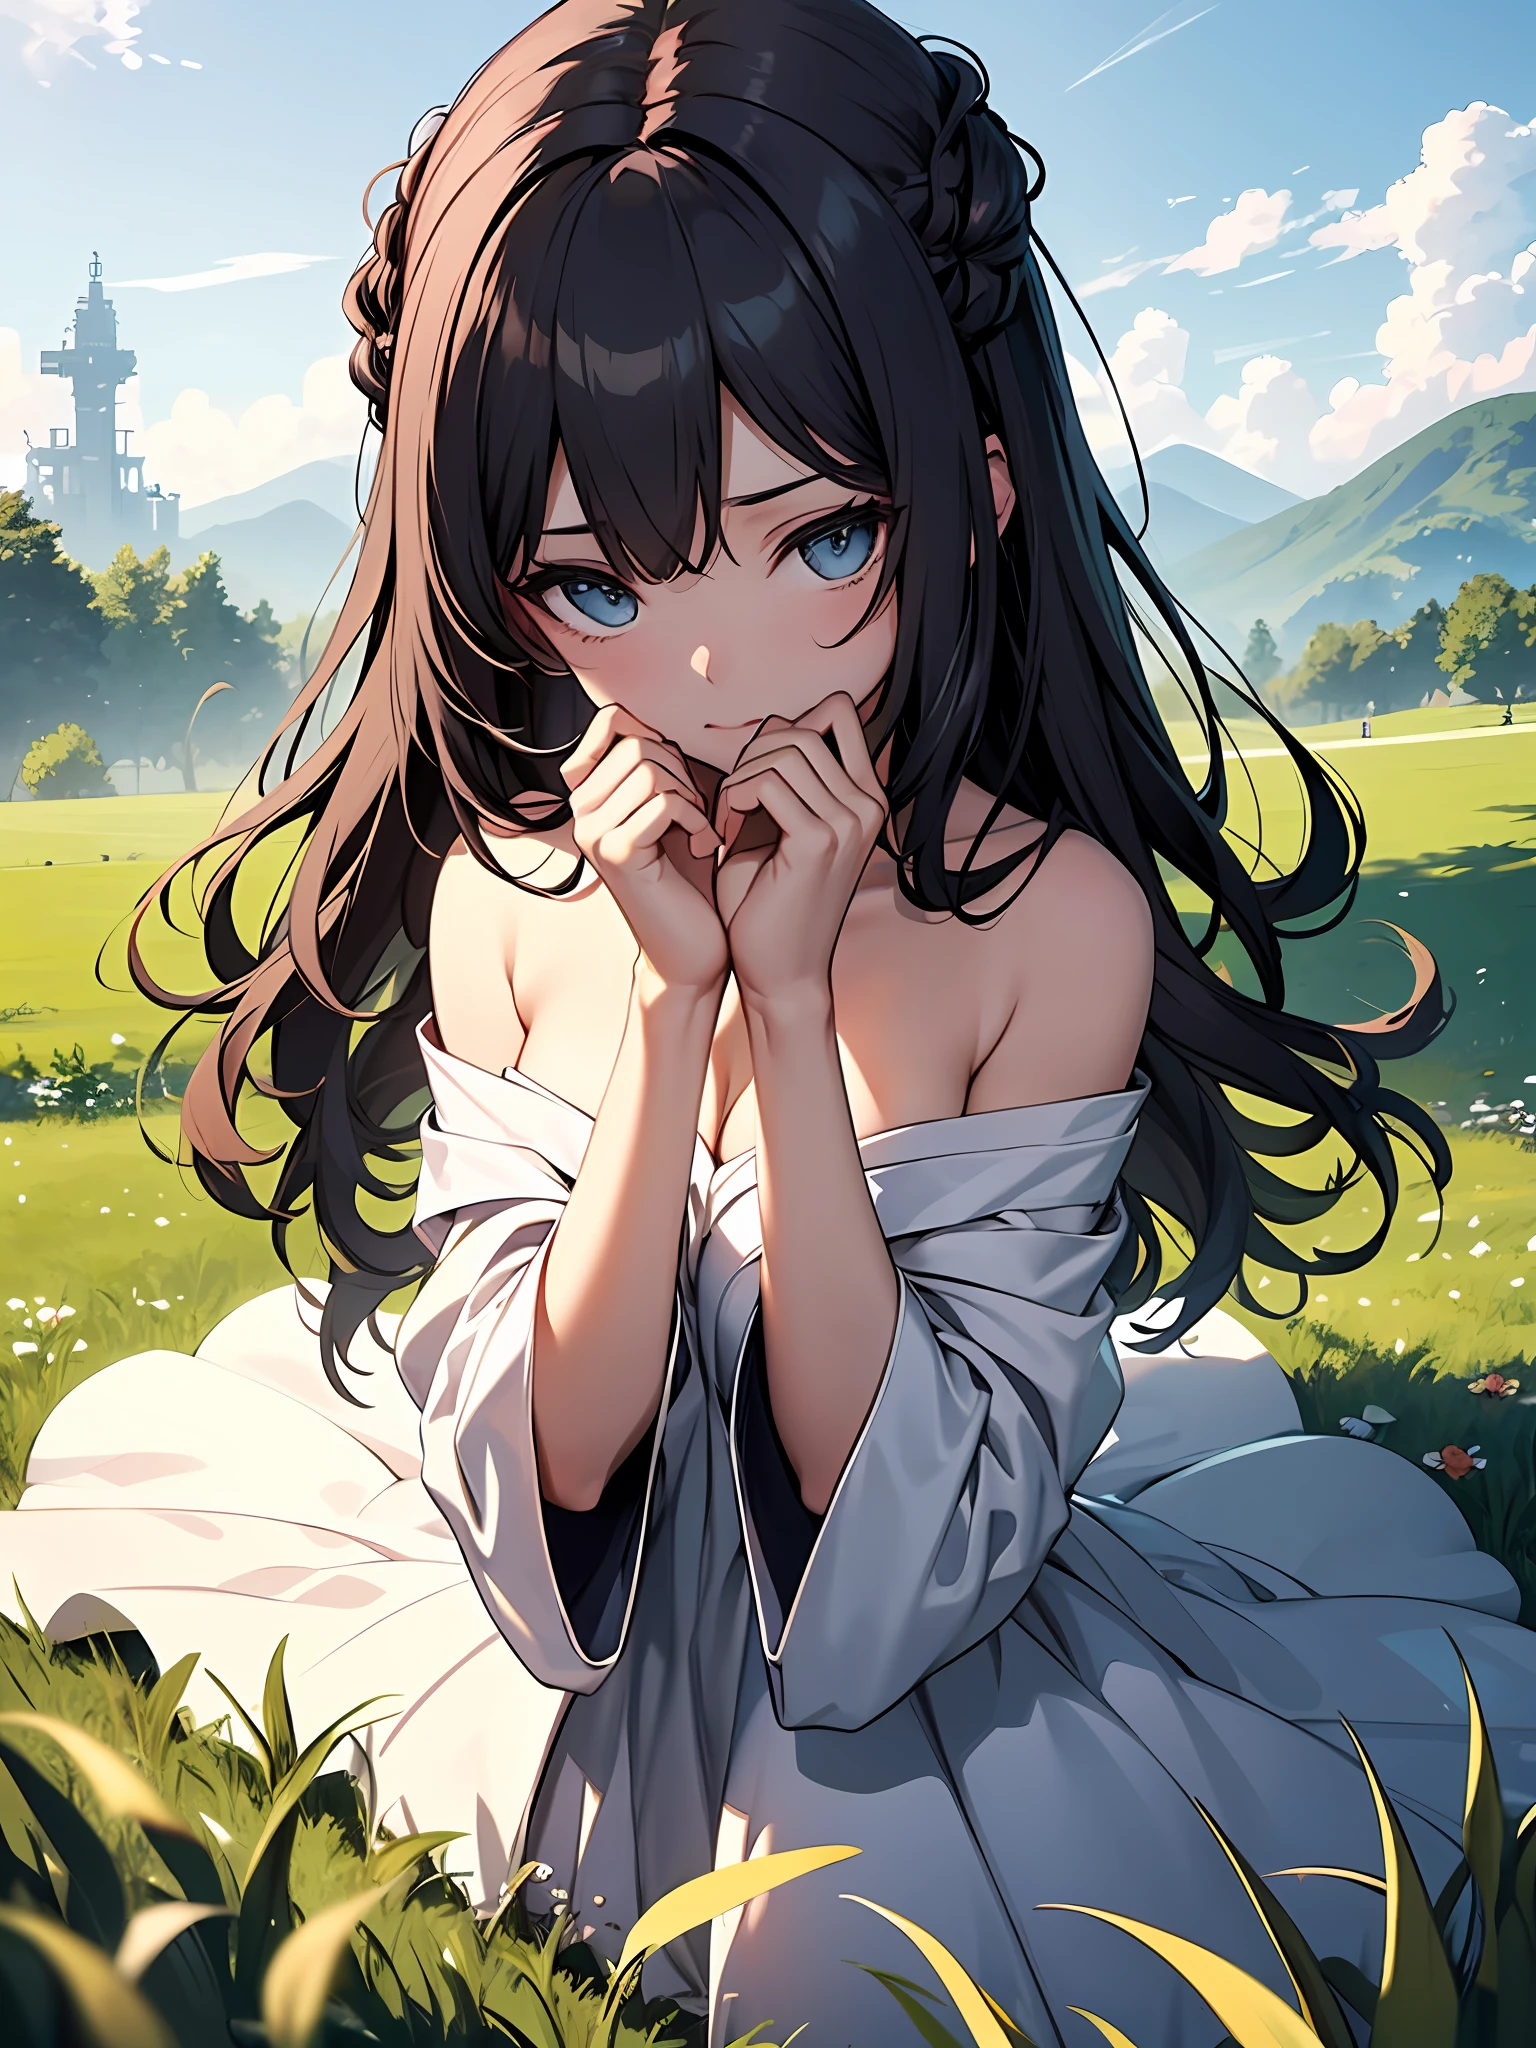 {{Meisterwerk}}，illustartion，best quarity，Extremely detailed CG Unity 8K wallpapers，1girl_soe flat, grass field, hands beside you, look audience, overlooking the angle,Naked dress,